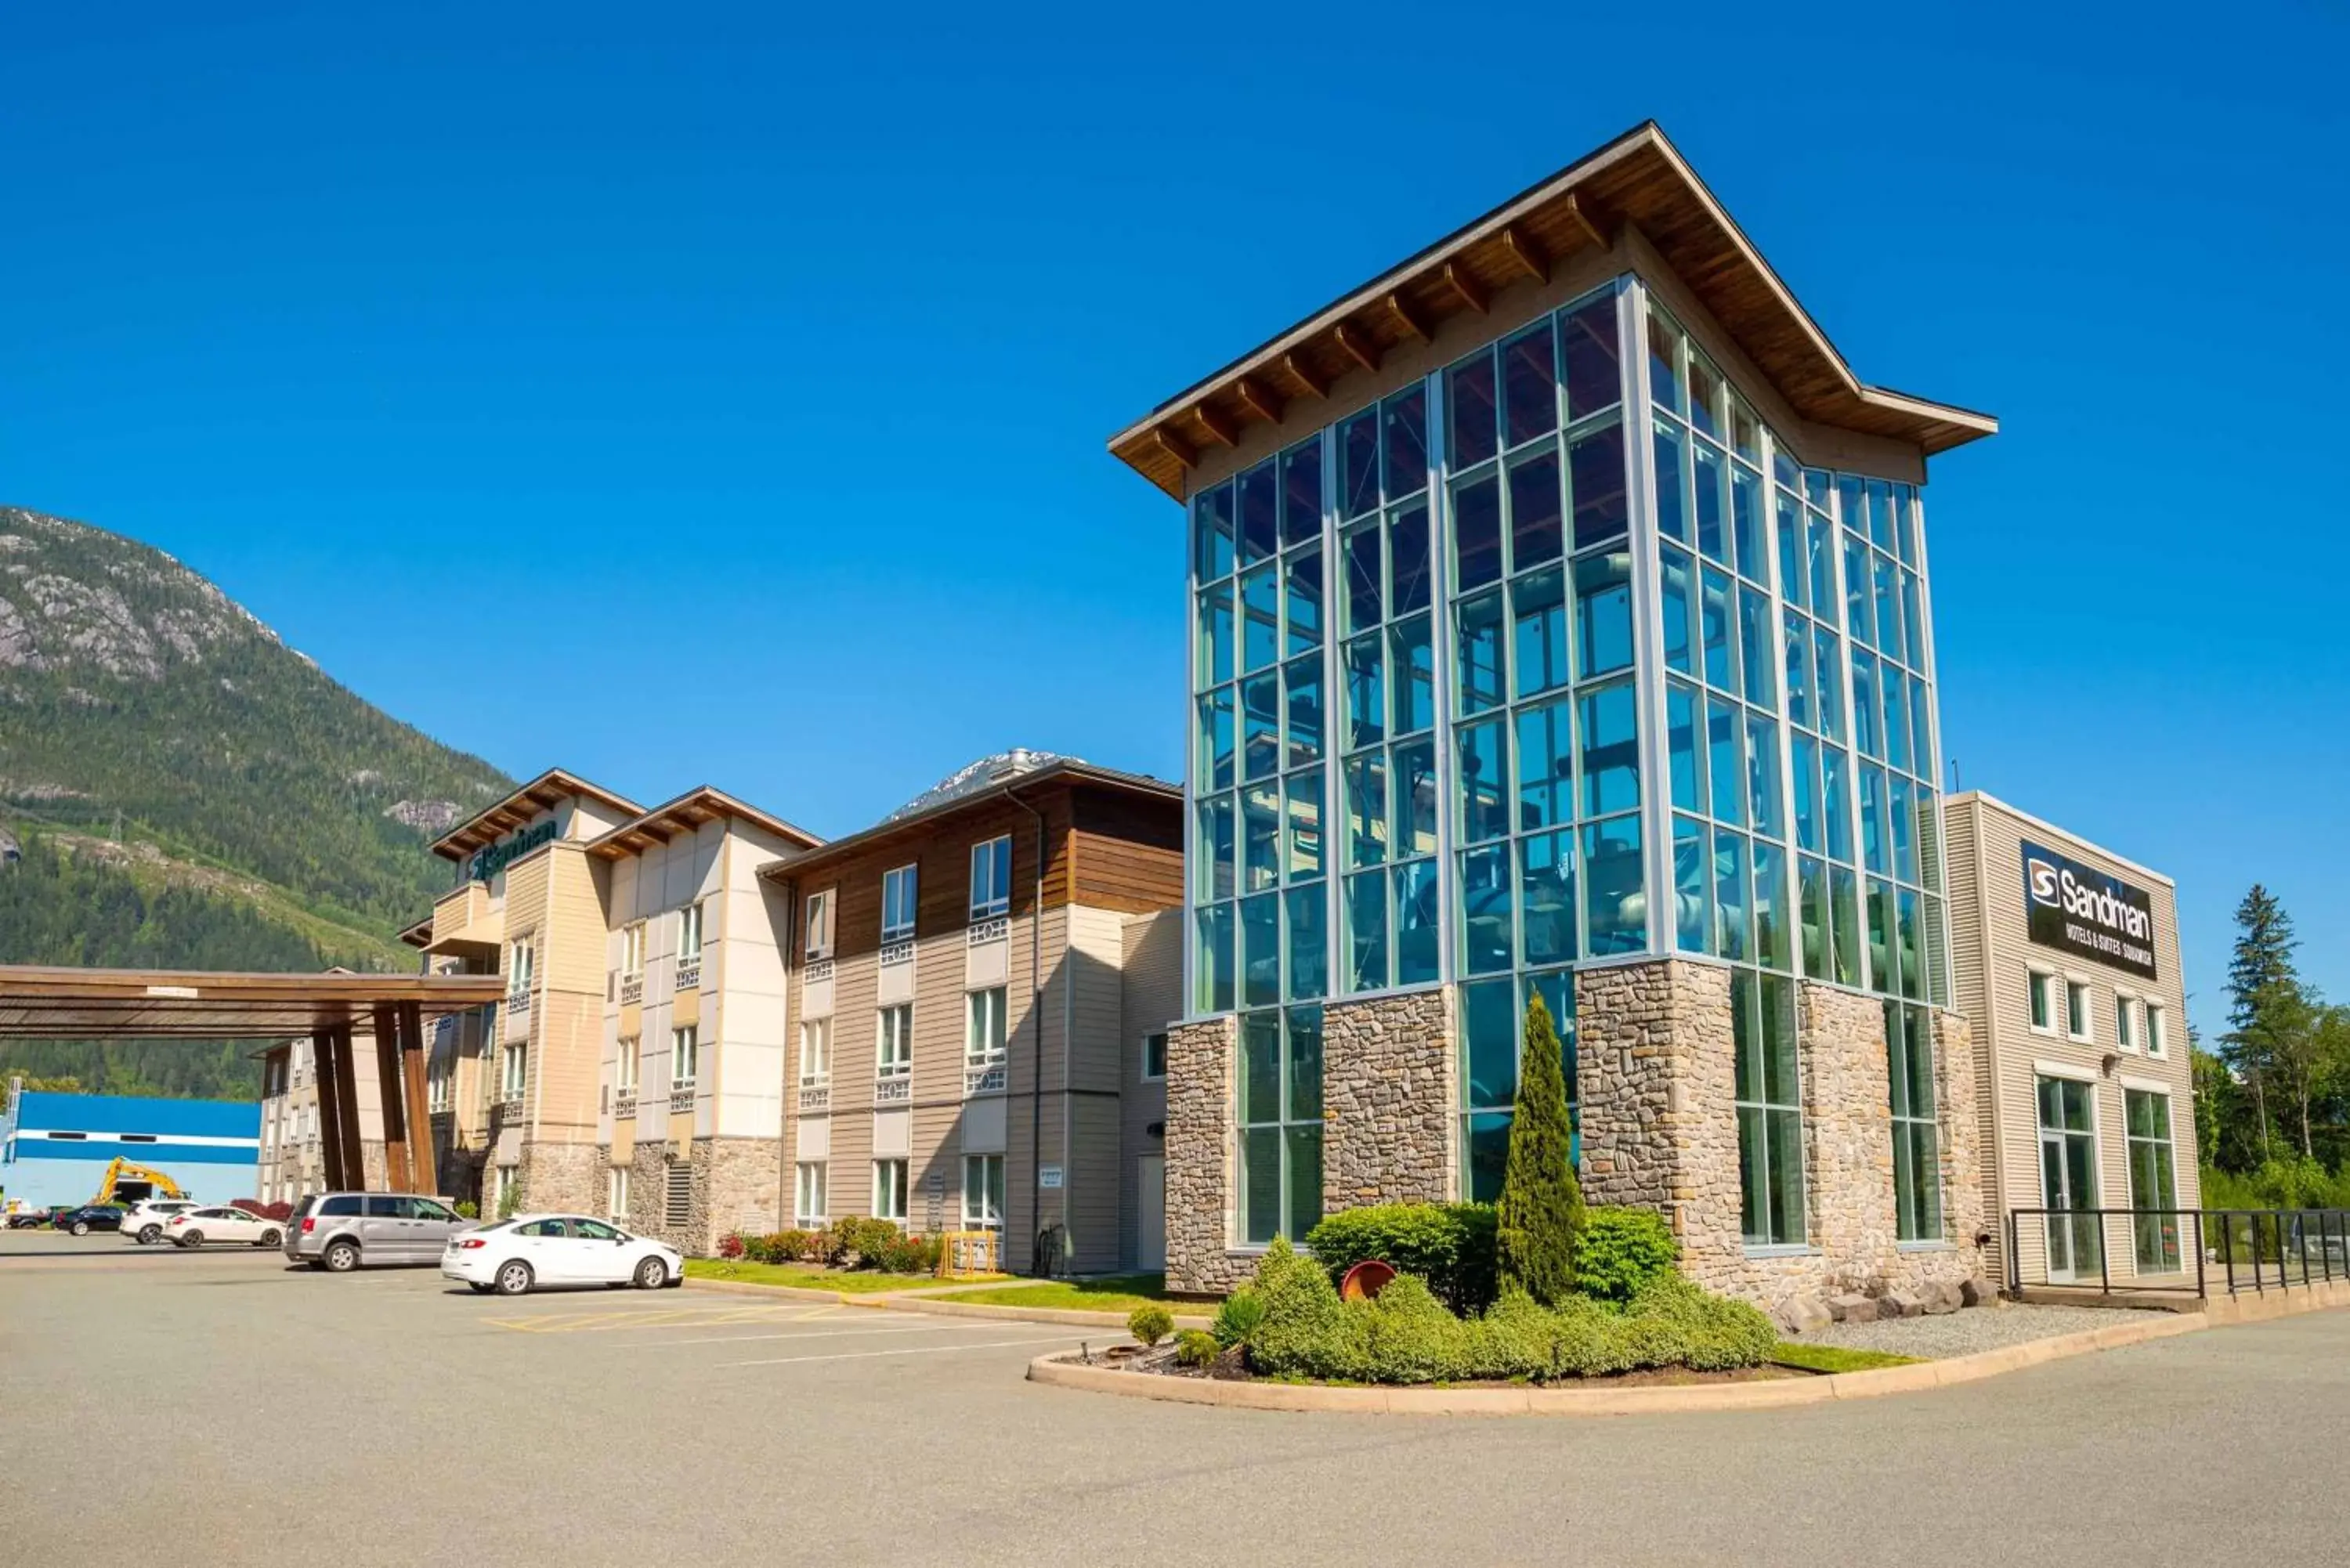 Property Building in Sandman Hotel and Suites Squamish